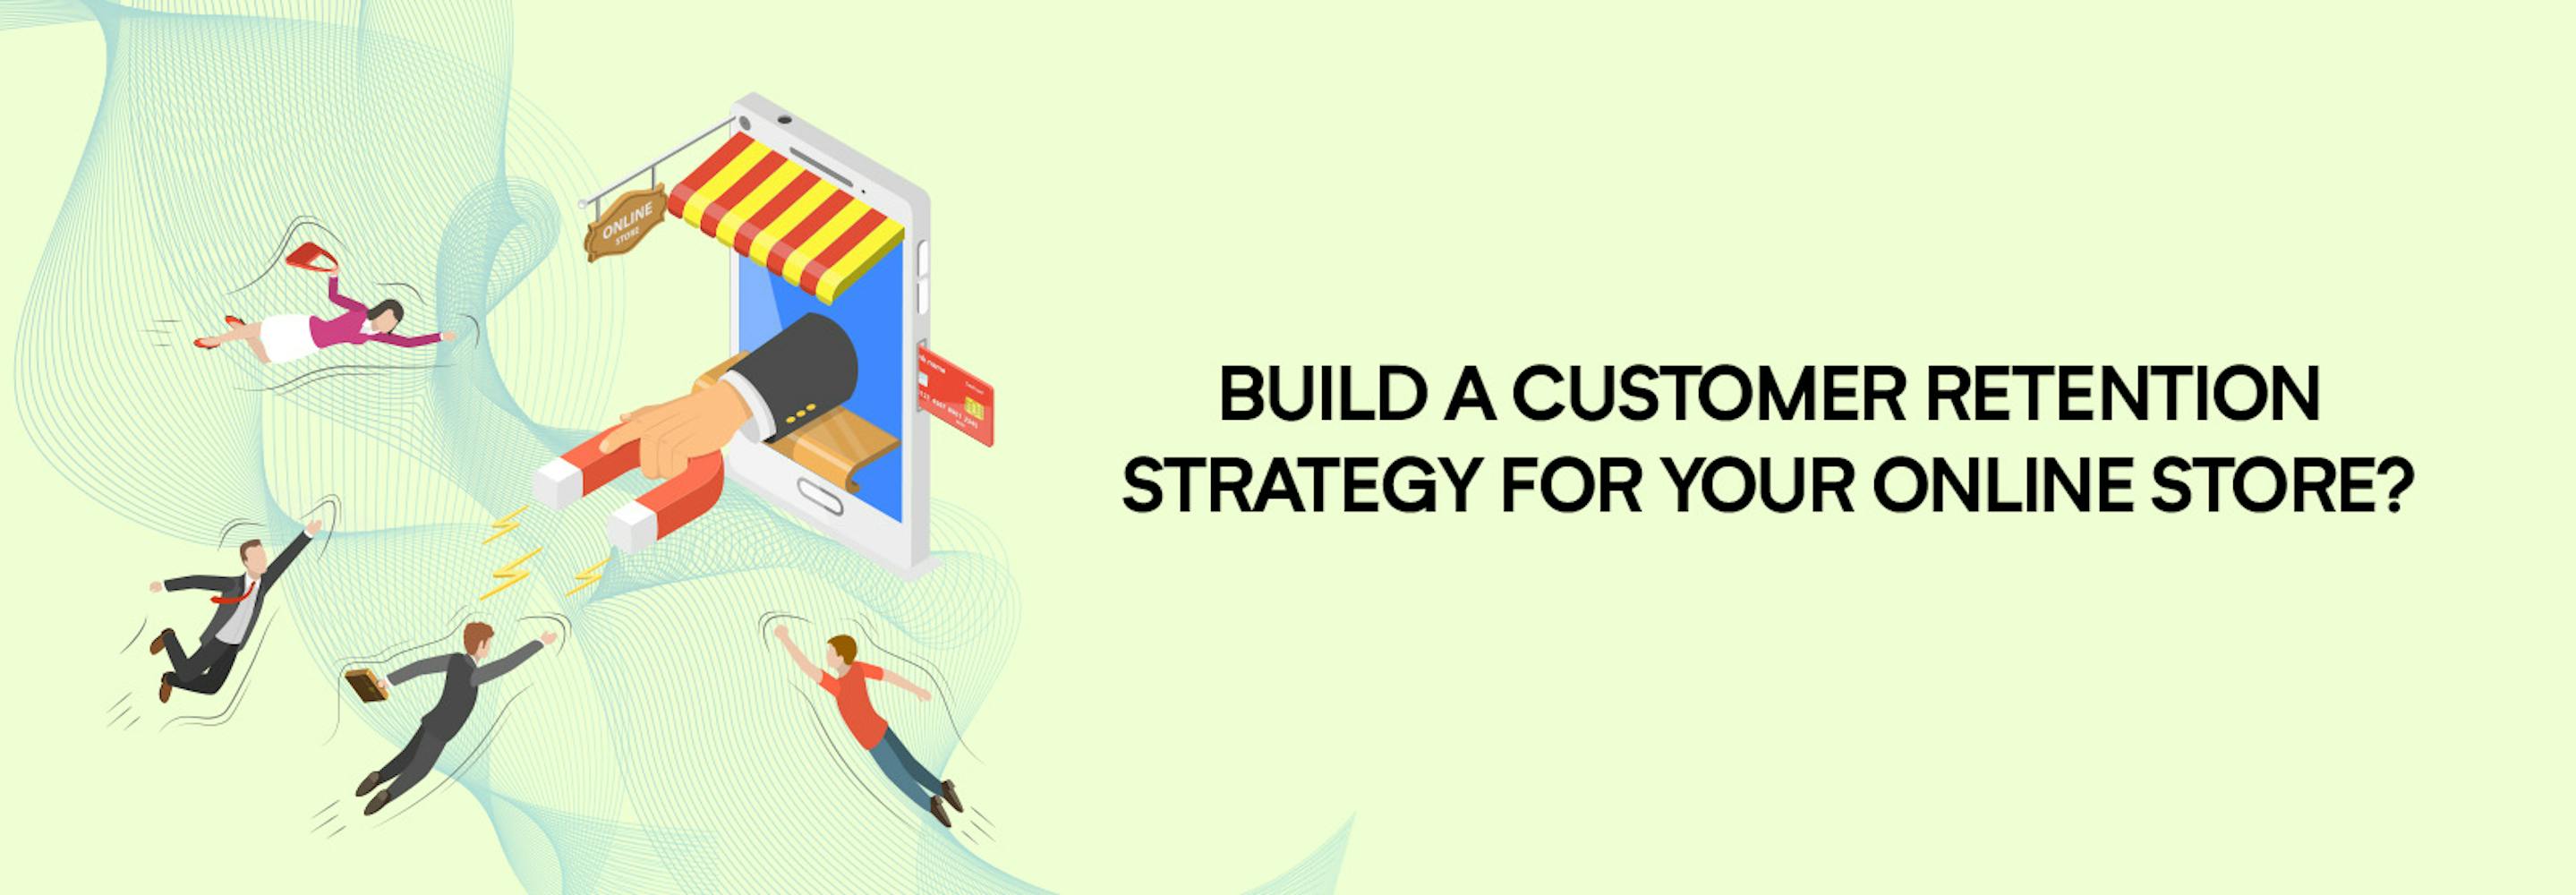  Build a customer retention strategy for your online store